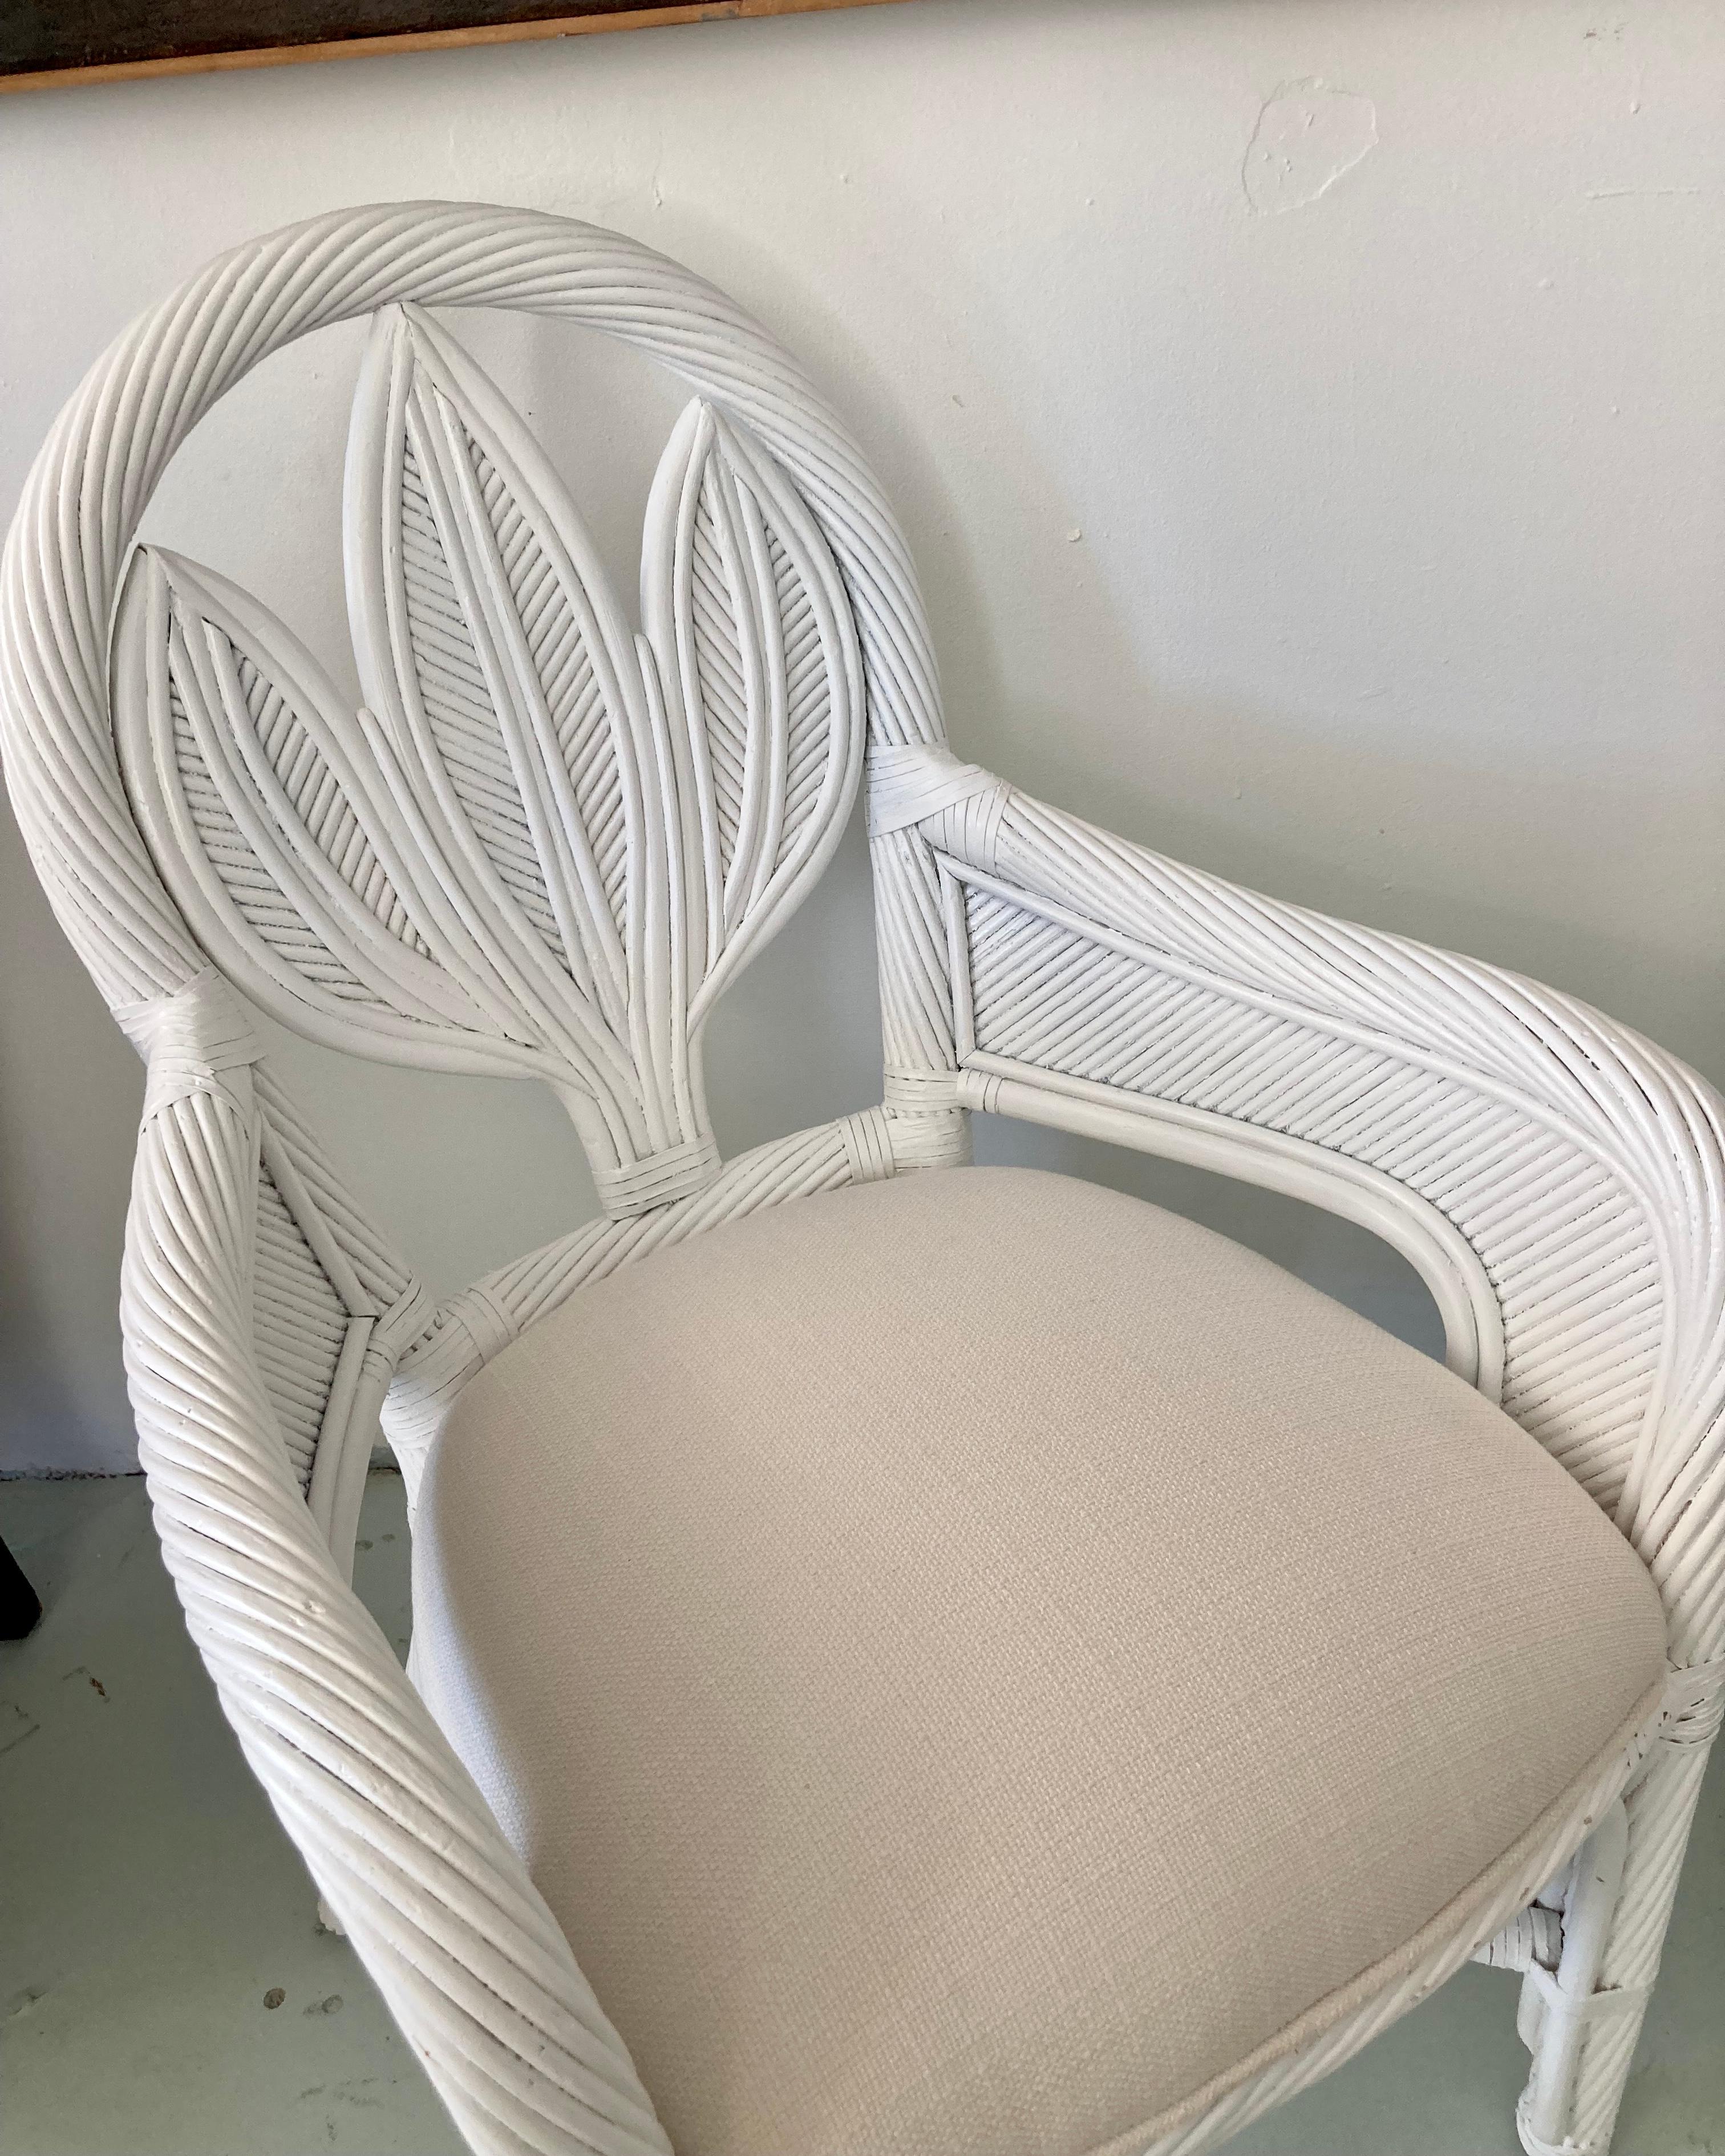 Upholstery Gabriella Crespi Pencil Reed Rattan Arm Chairs, a Pair For Sale